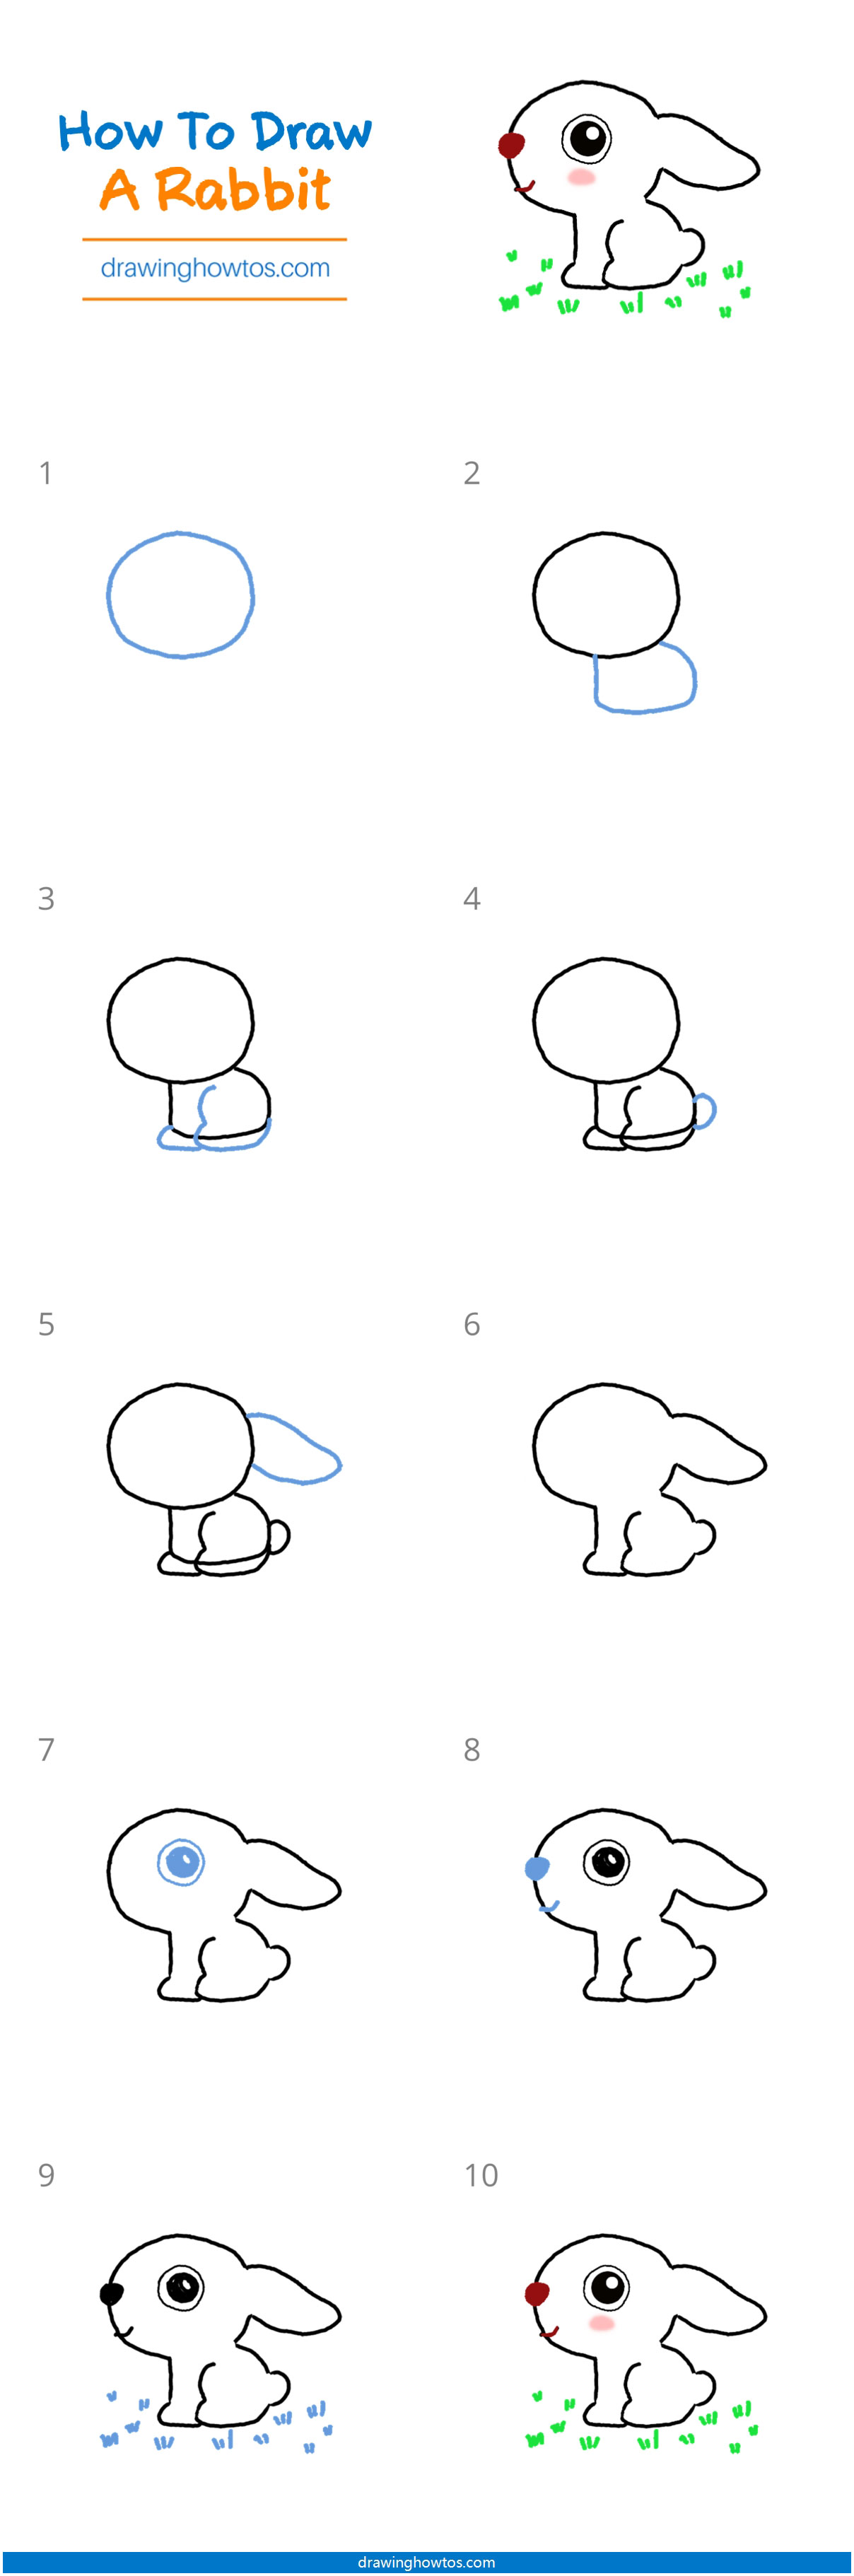 How to Draw a Rabbit Step by Step